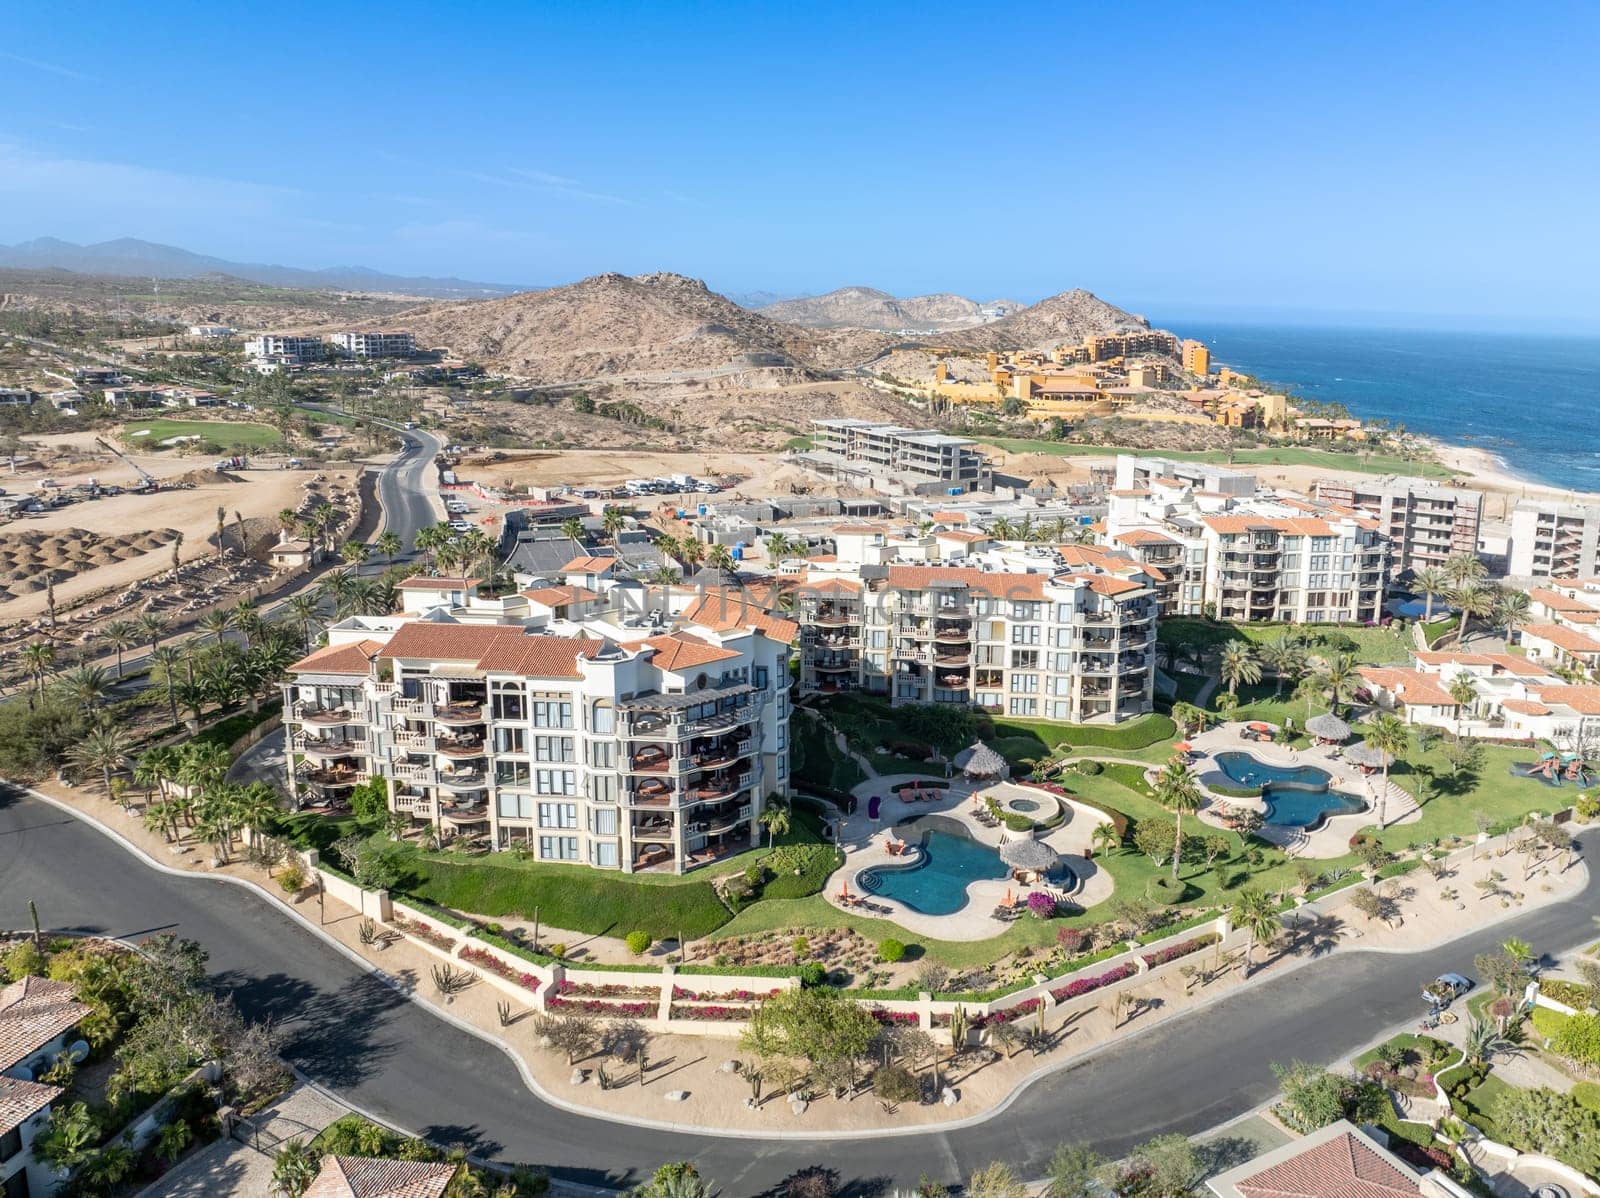 Aerial view of big resorts with pool in Cabo San Jose, Baja California Sur, Mexico